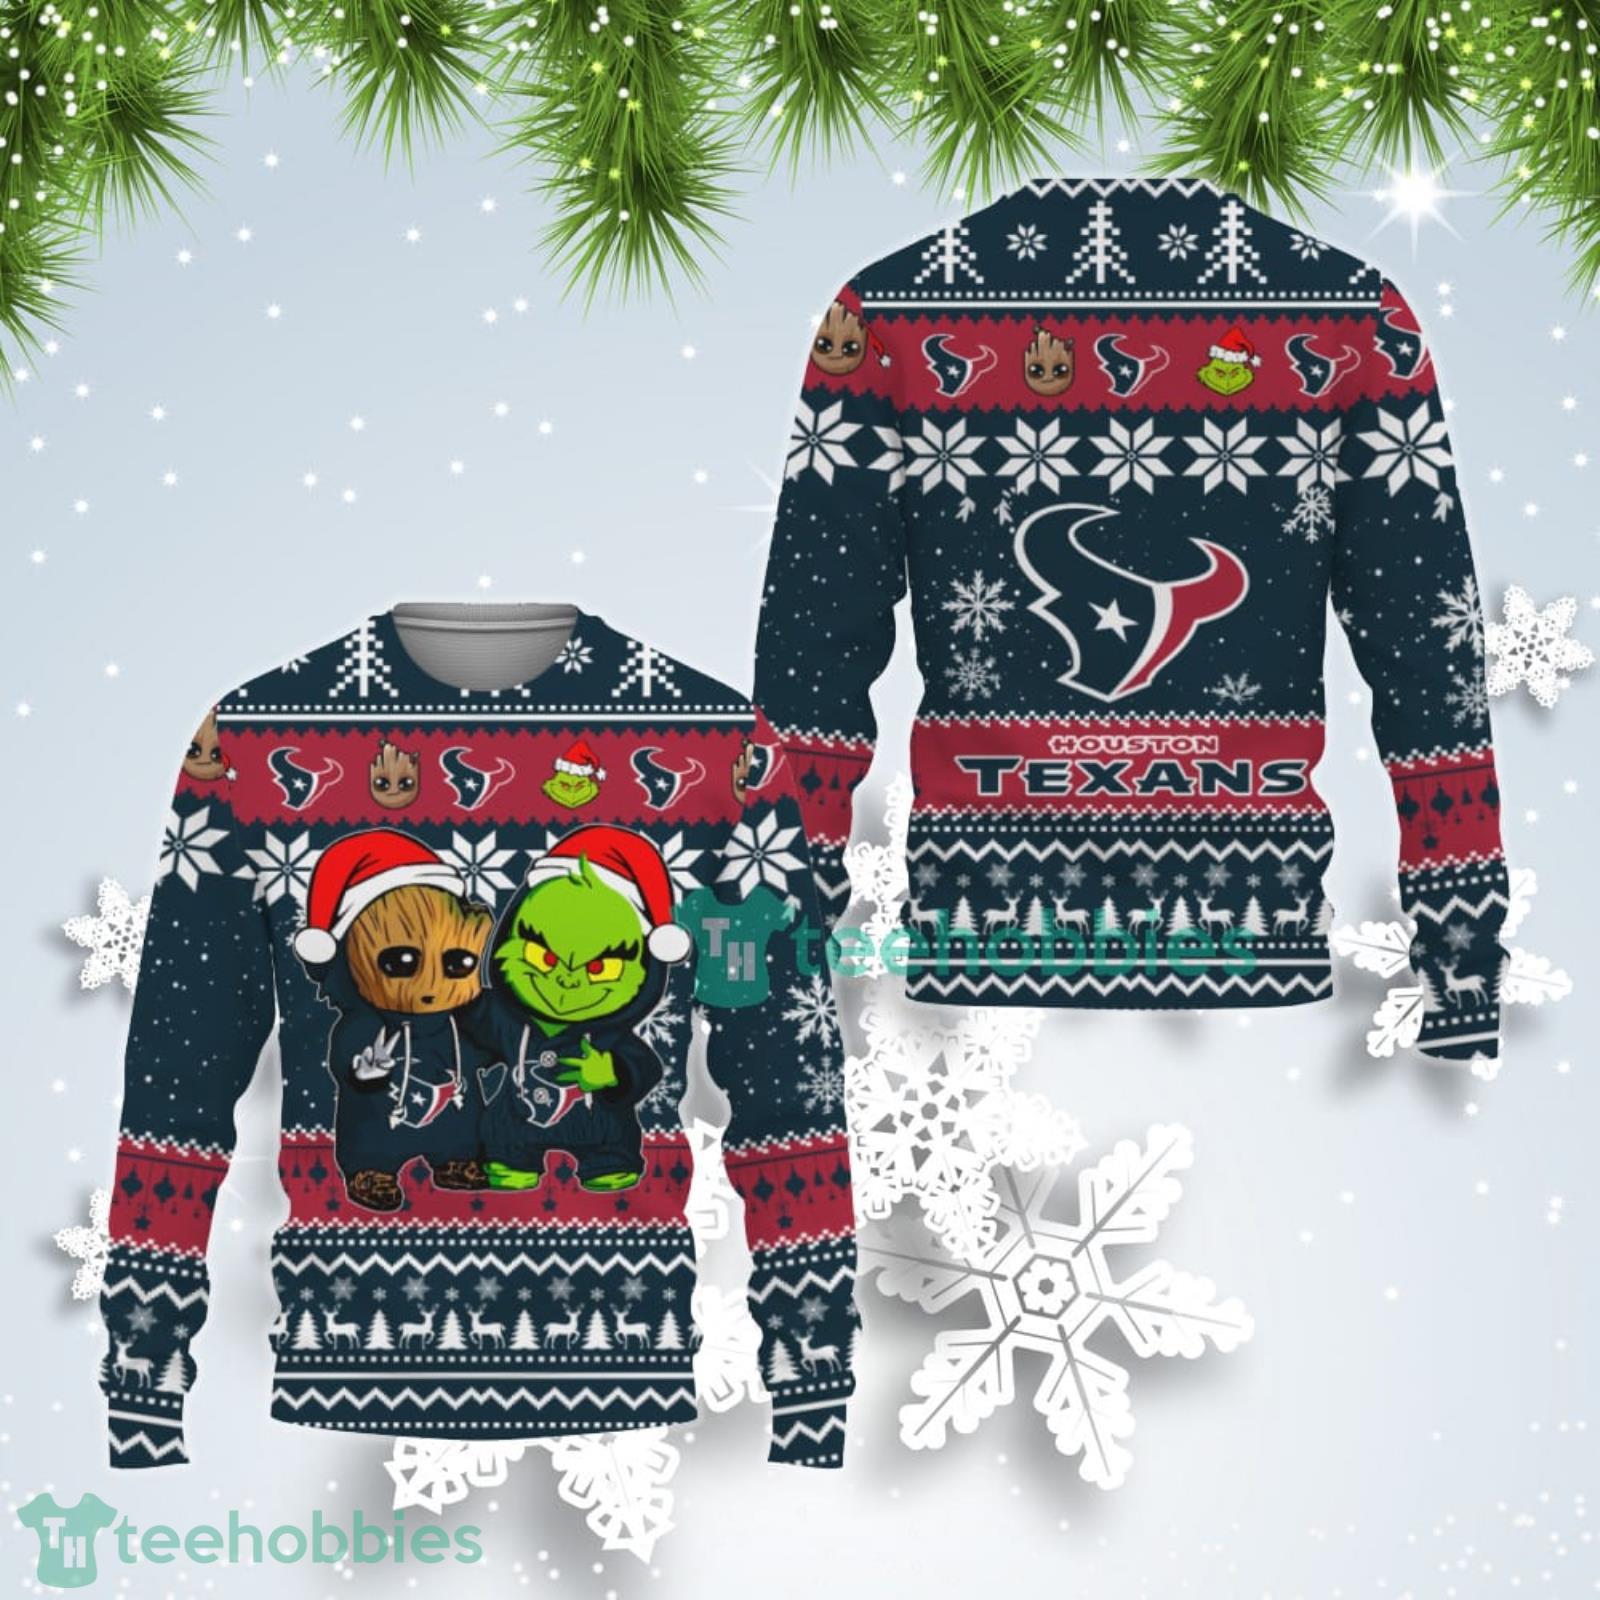 Houston Texans Baby Groot And Grinch Best Friends Ugly Christmas Sweater Product Photo 1